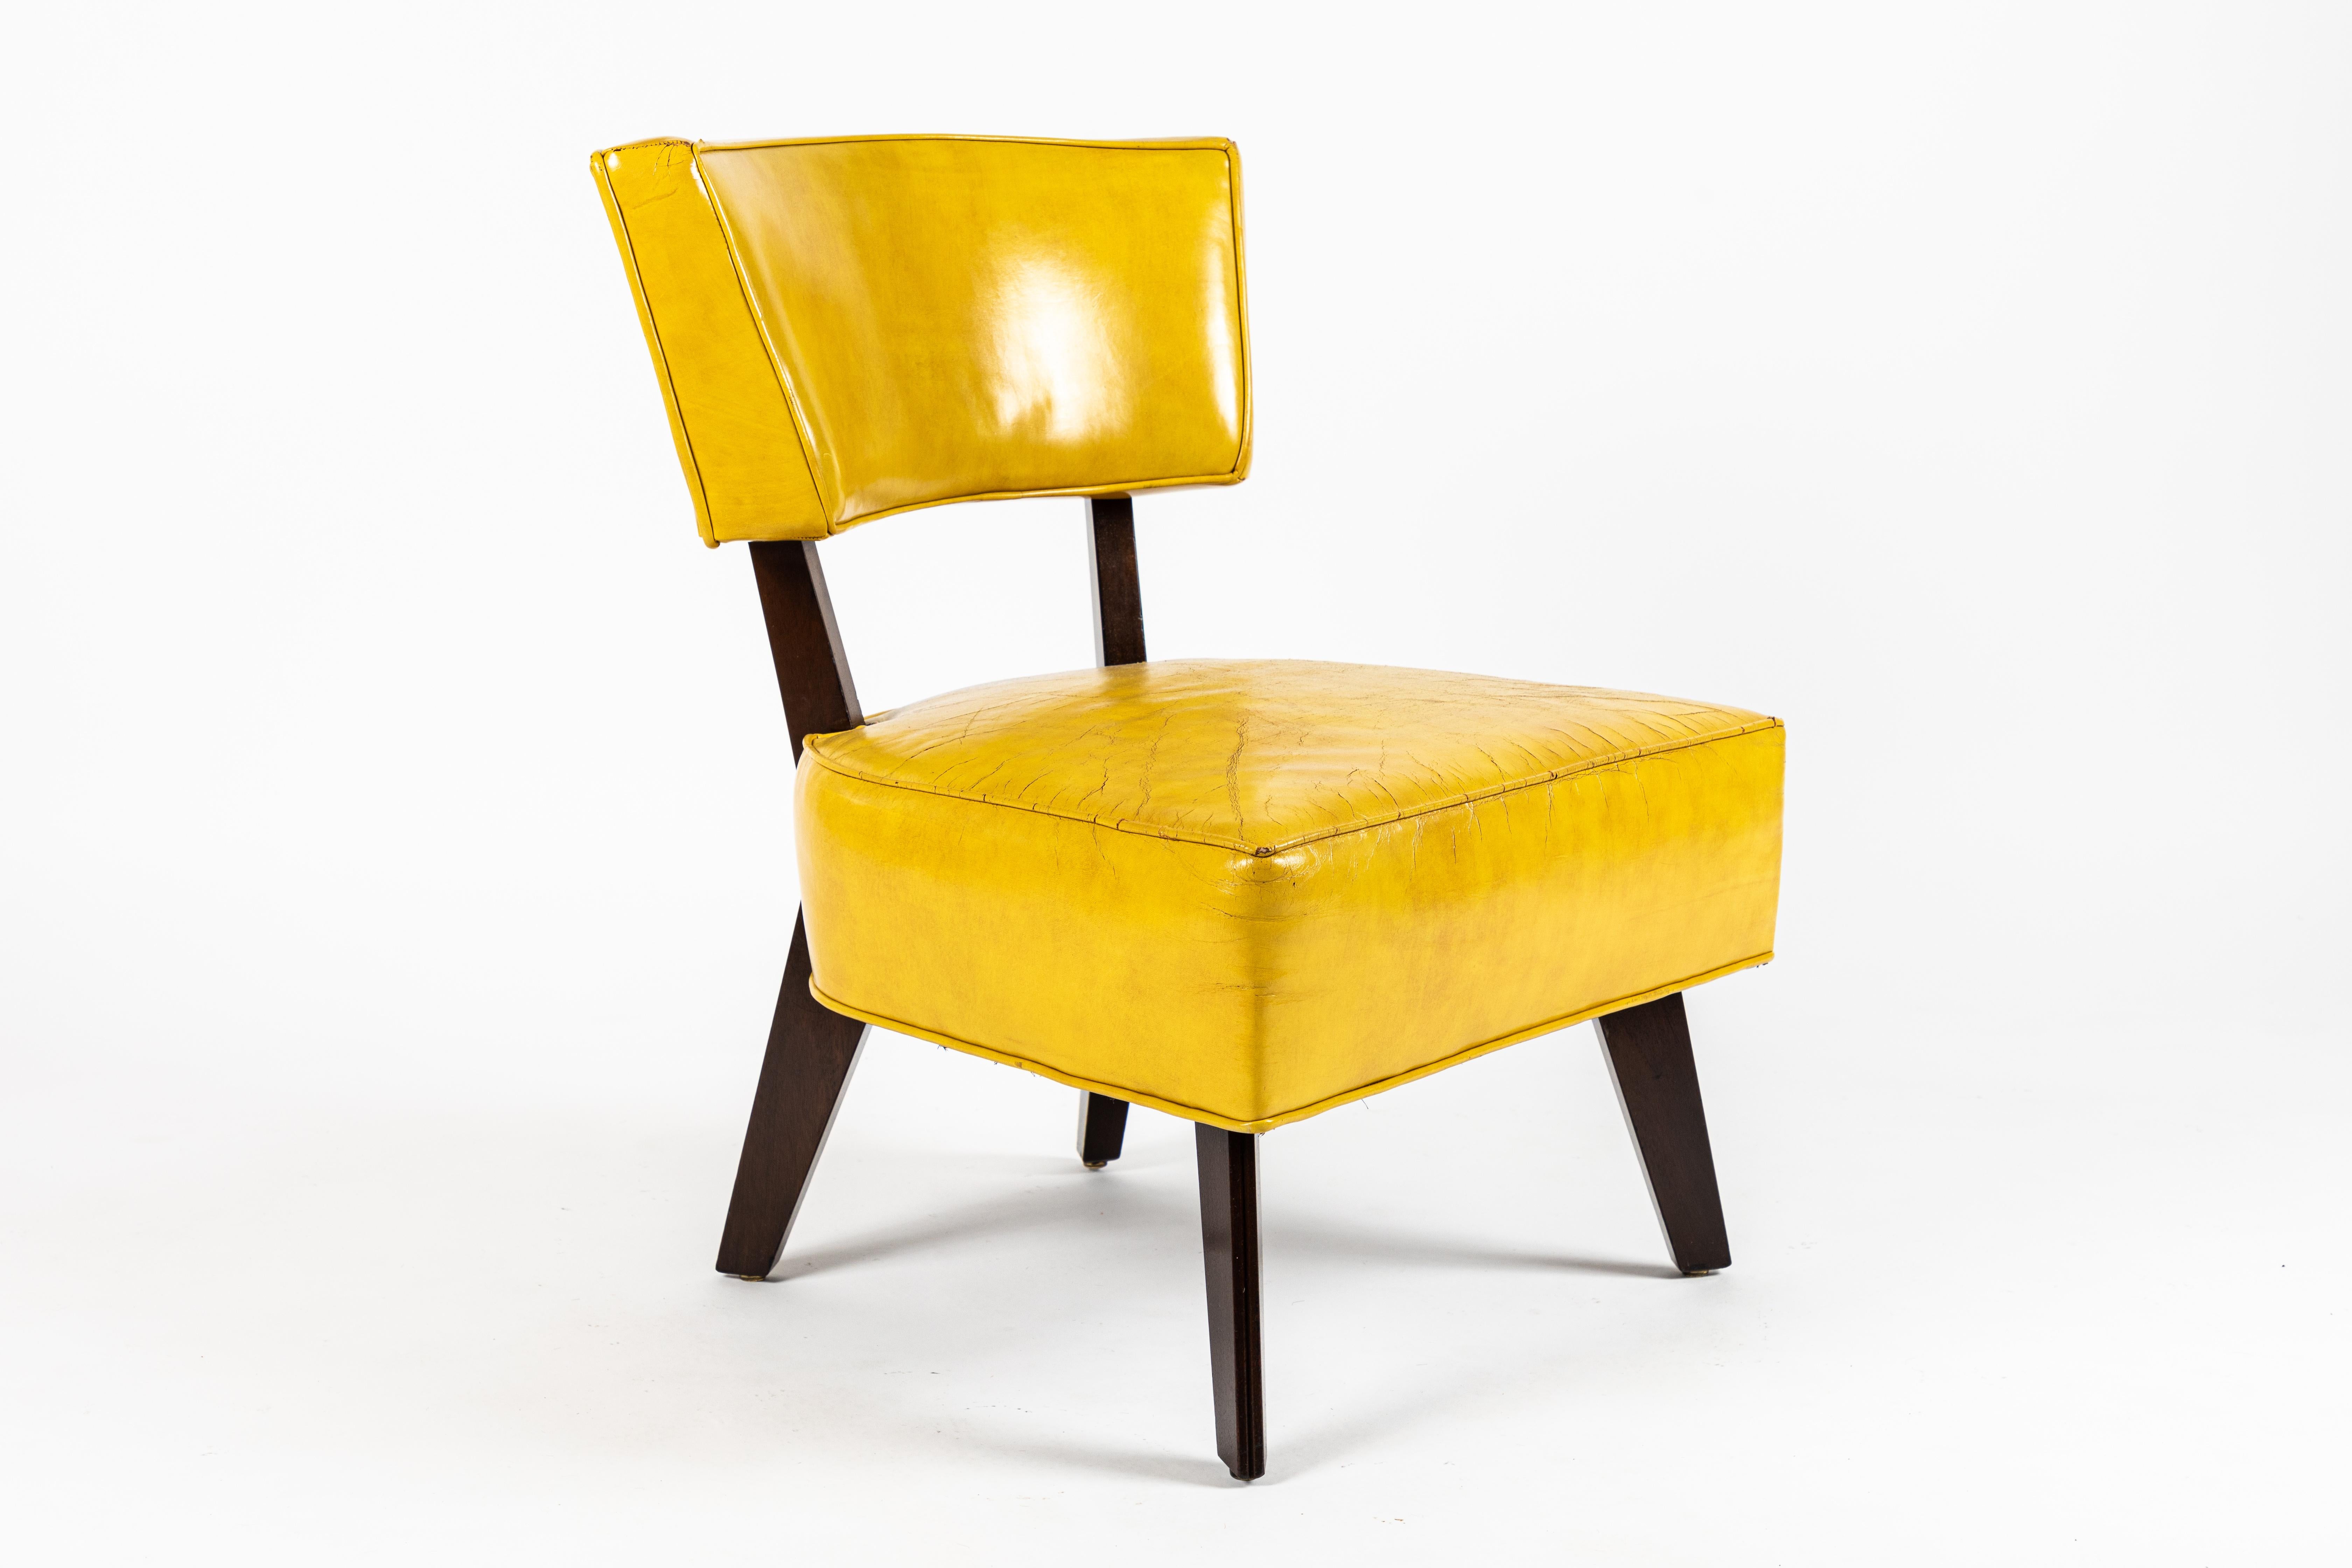 Mid-Century Modern Pair of Low Chairs Designed by William Haines